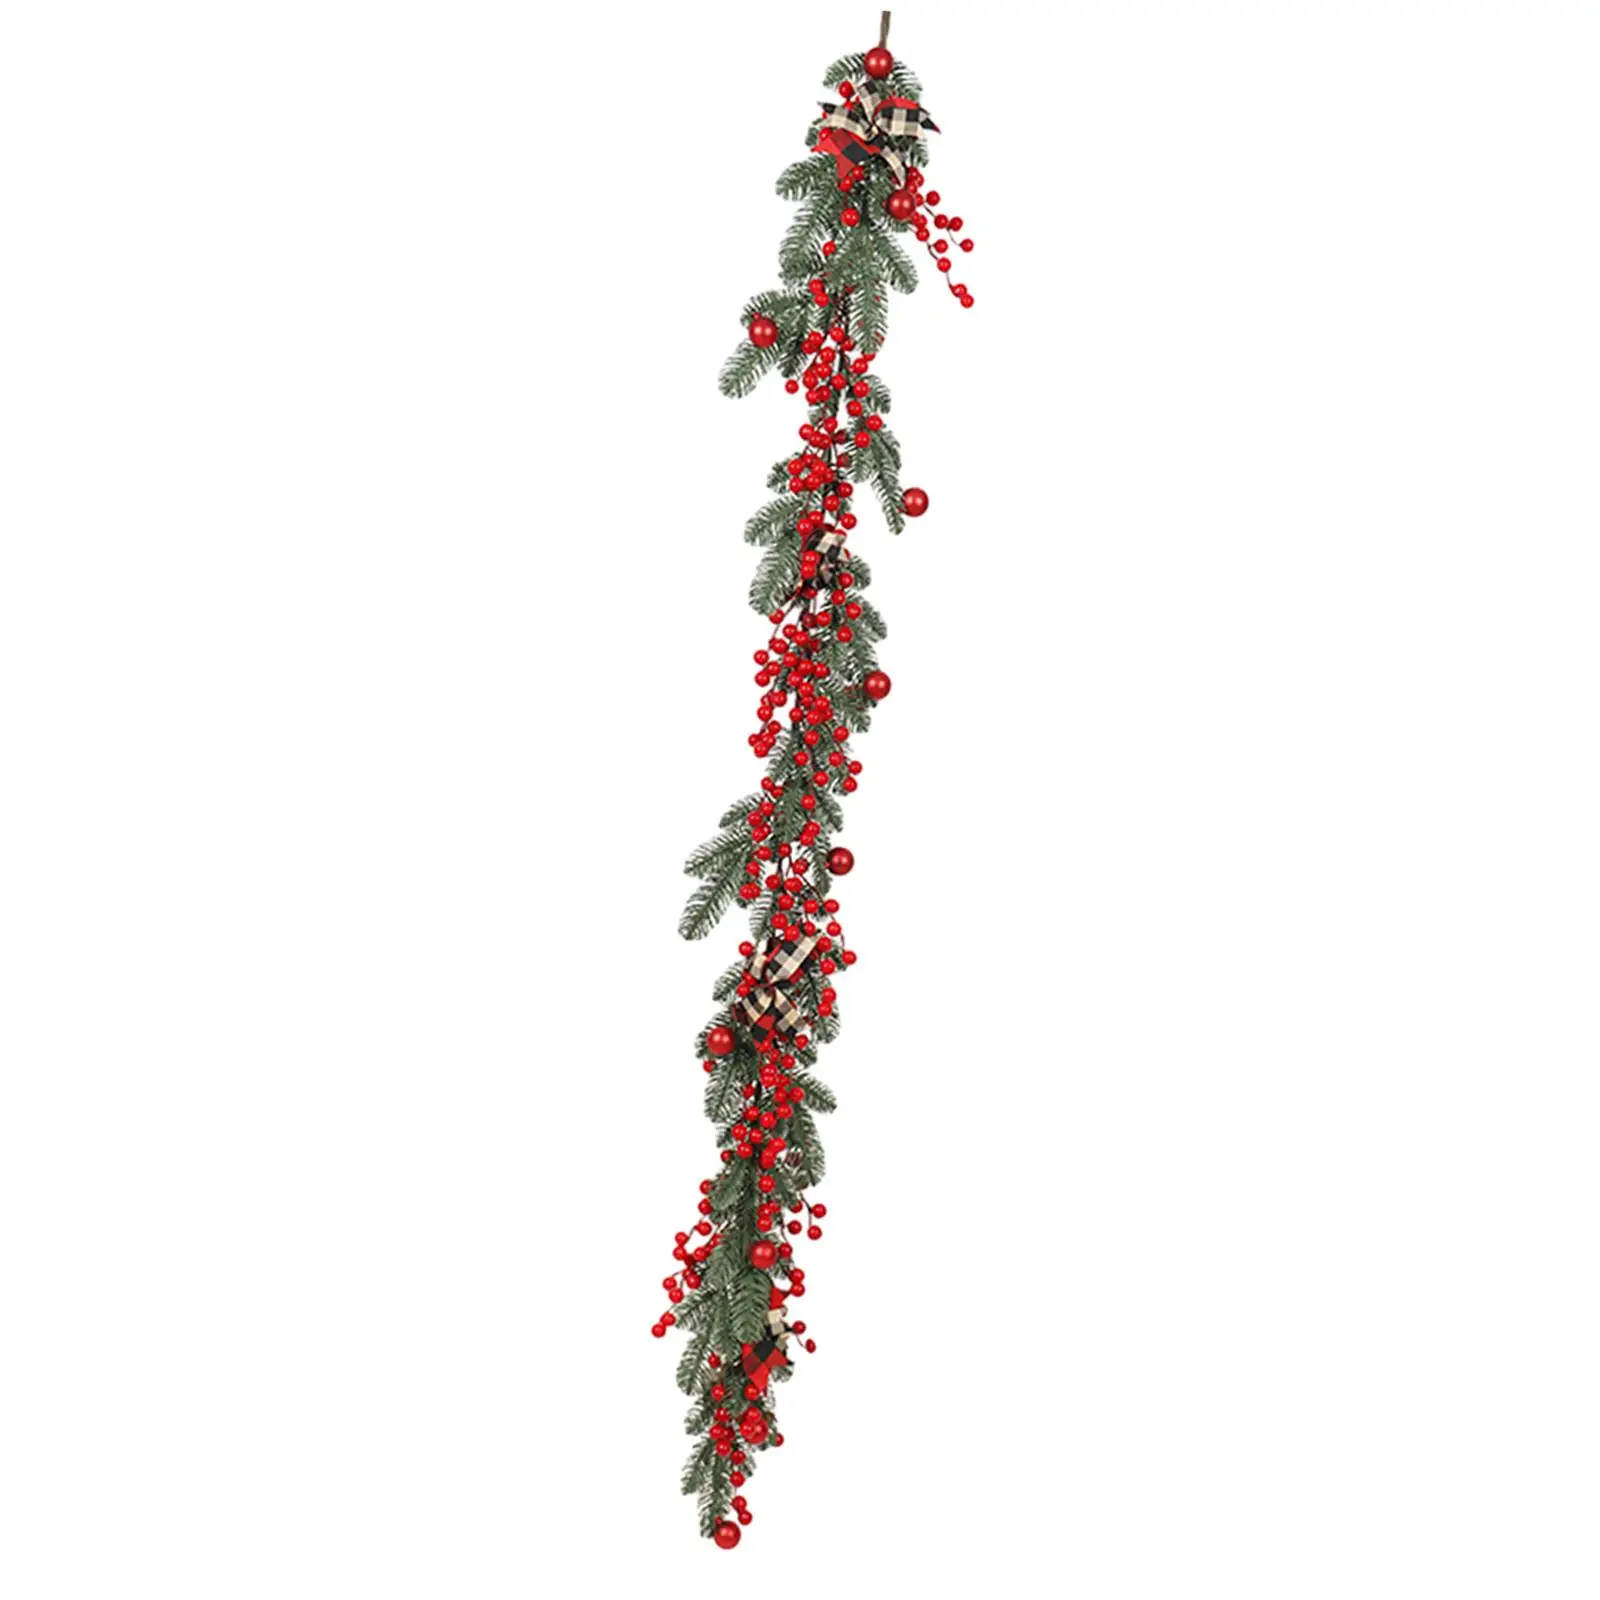 Christmas Wreath Artificial Red Berries Branch Wreath Wall Hanging DIY Xmas Garland for New Year Holiday Party Garden Xmas